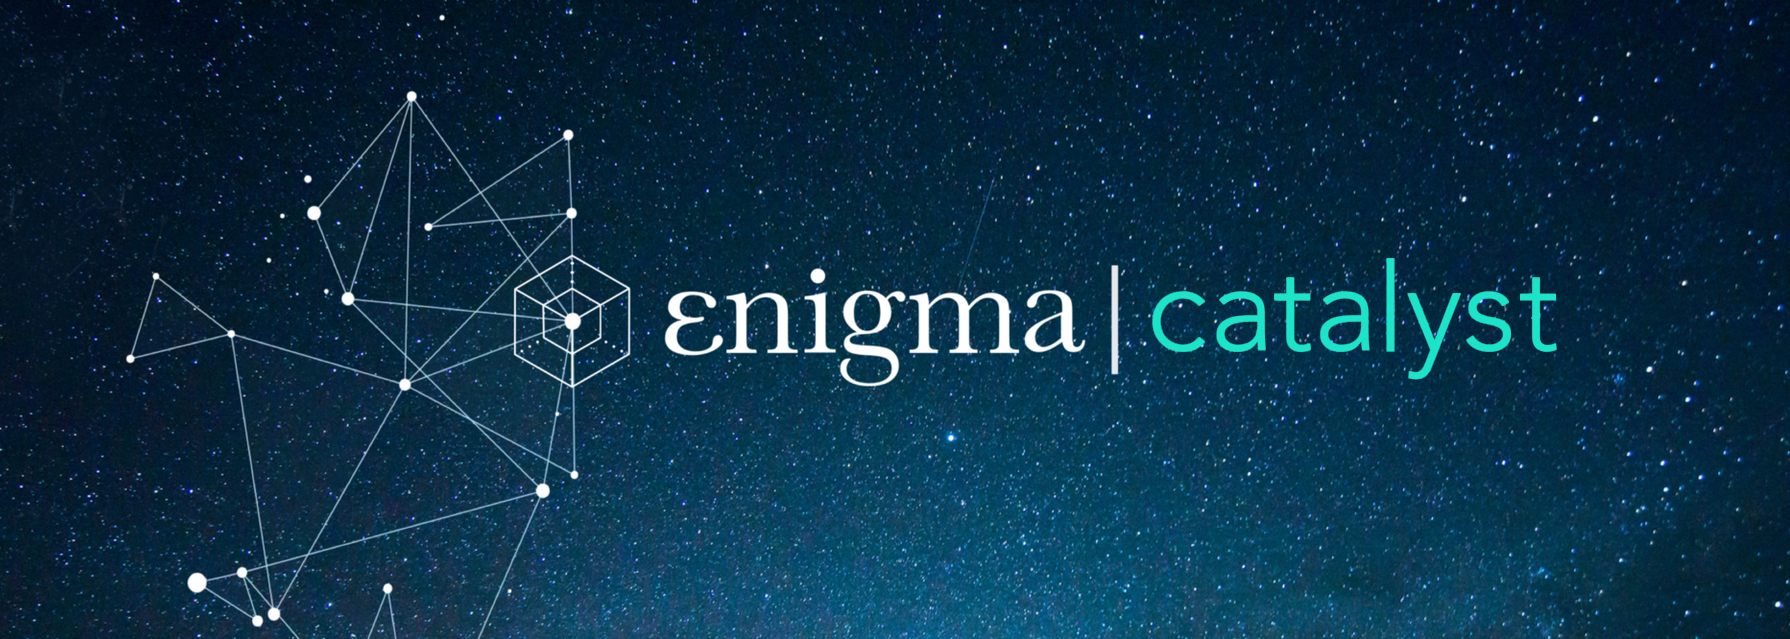 illustration of the enigma project